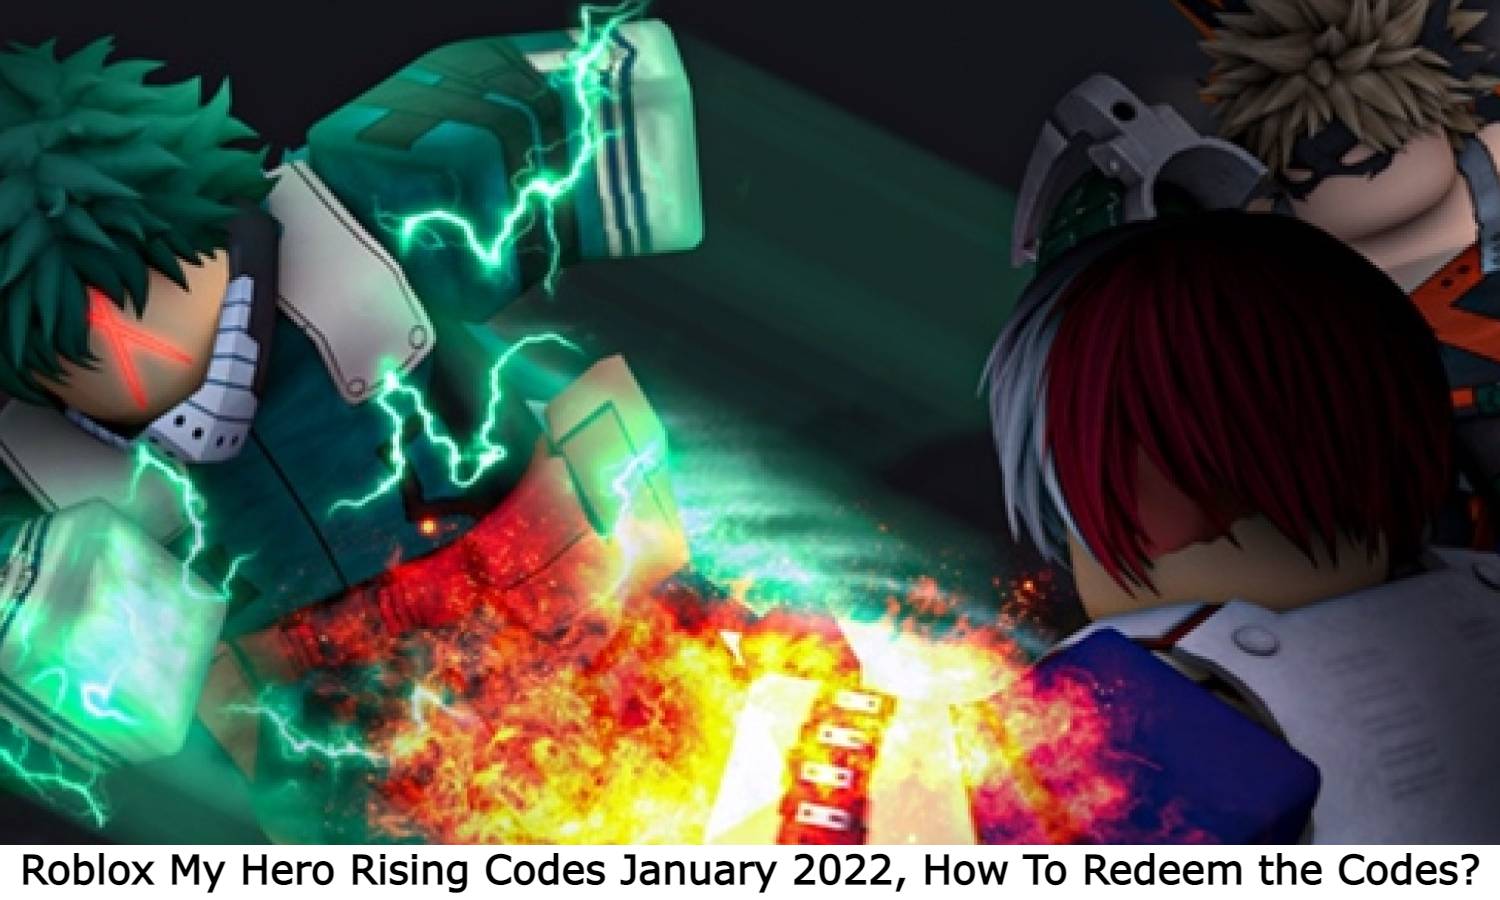 Roblox My Hero Rising Codes January 2022, How To Redeem the Codes?